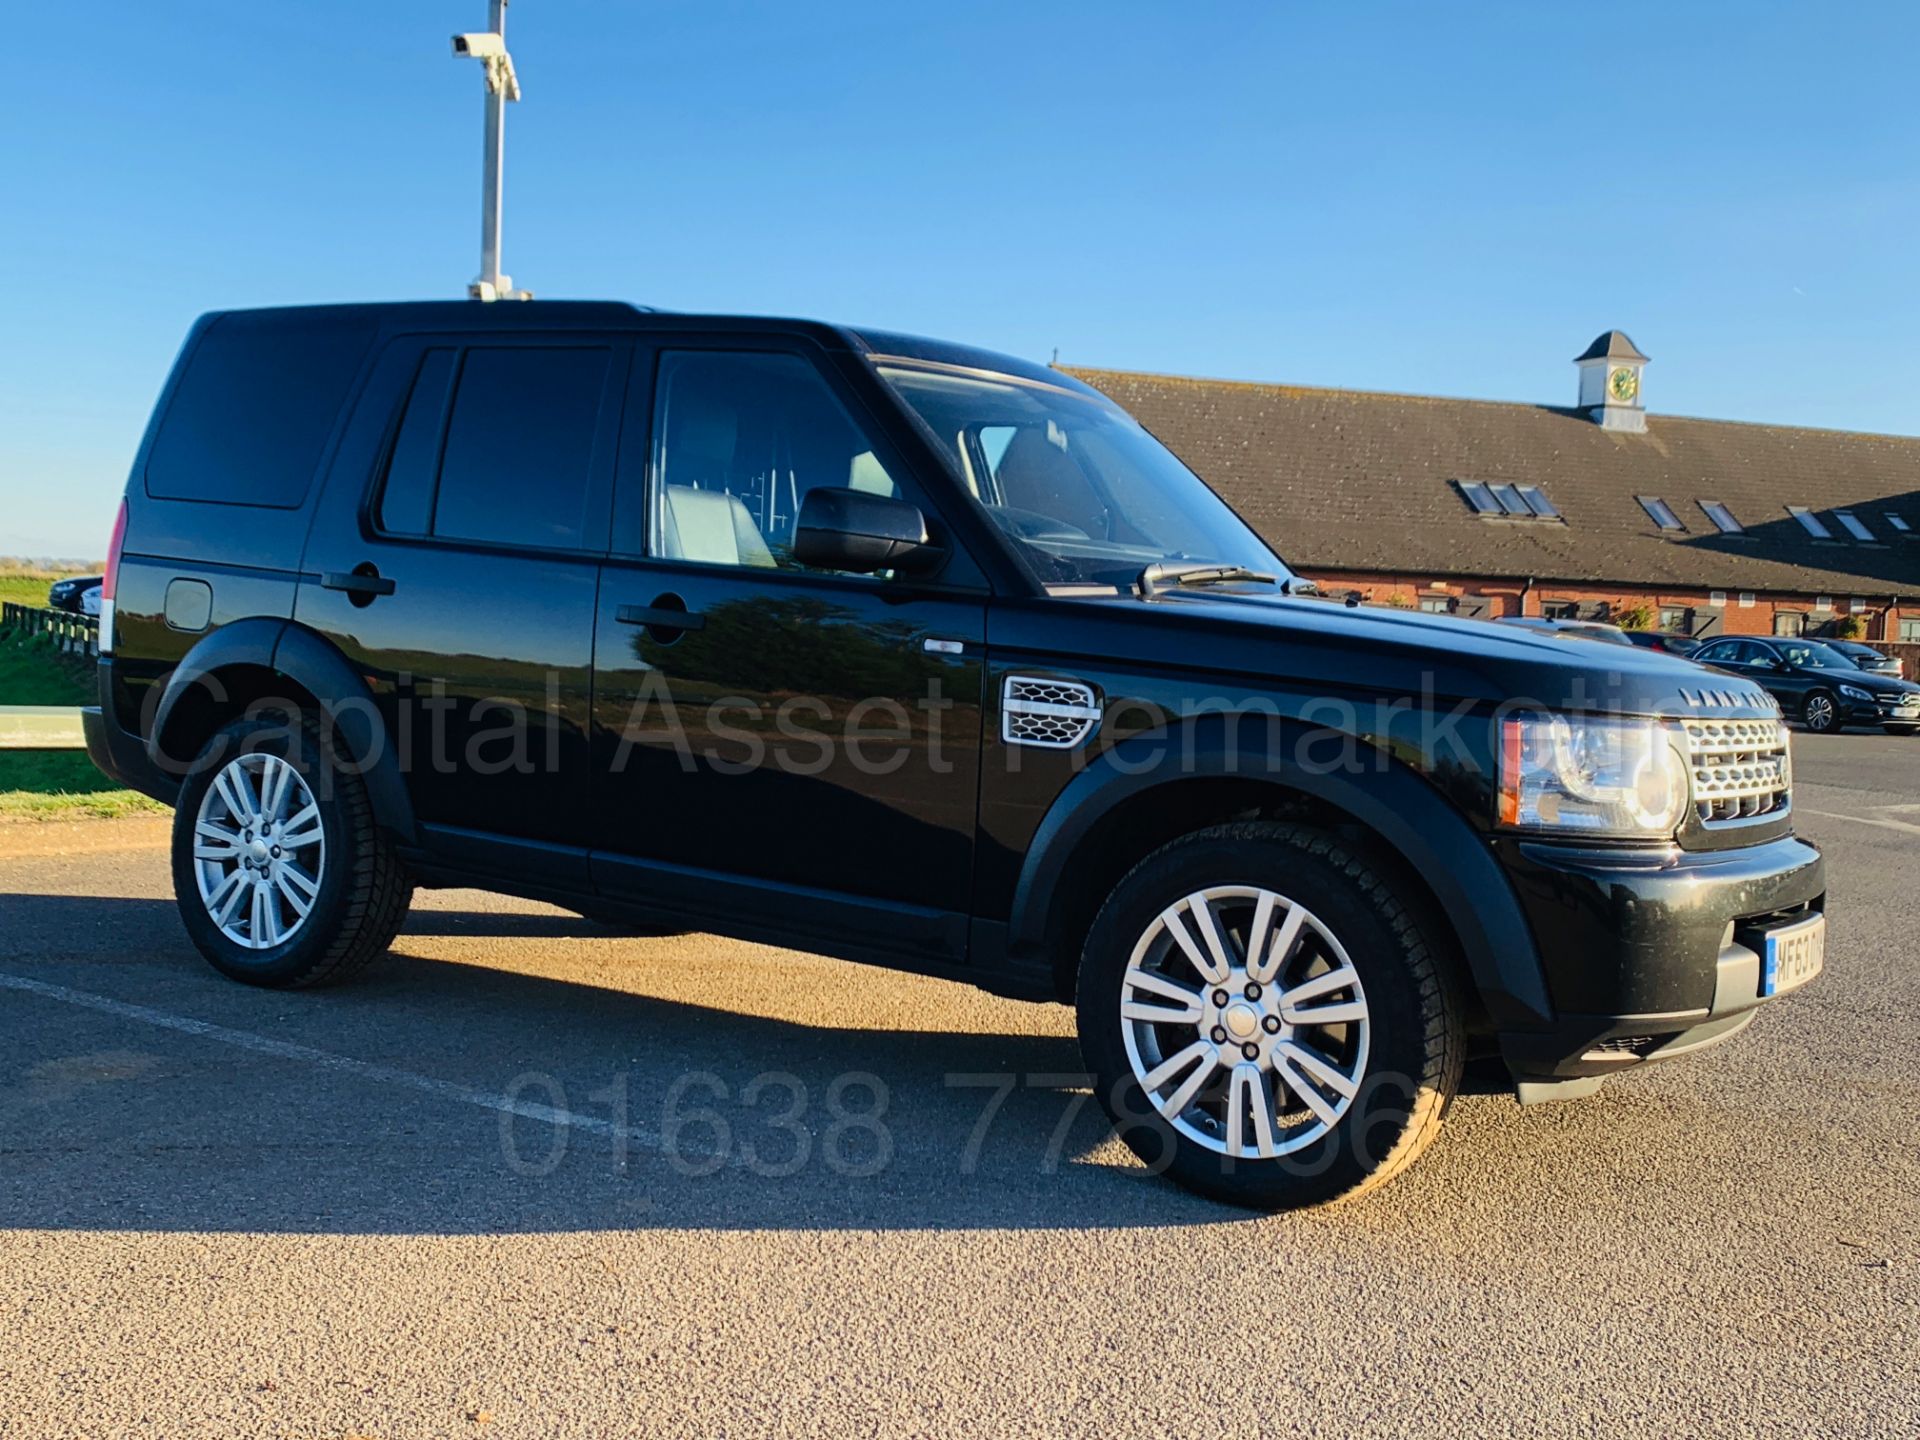 LAND ROVER DISCOVERY 4 **COMMERCIAL** (2014 MODEL) '3.0 SDV6 - 255 BHP - 8 SPEED AUTO' *HUGE SPEC* - Bild 10 aus 47